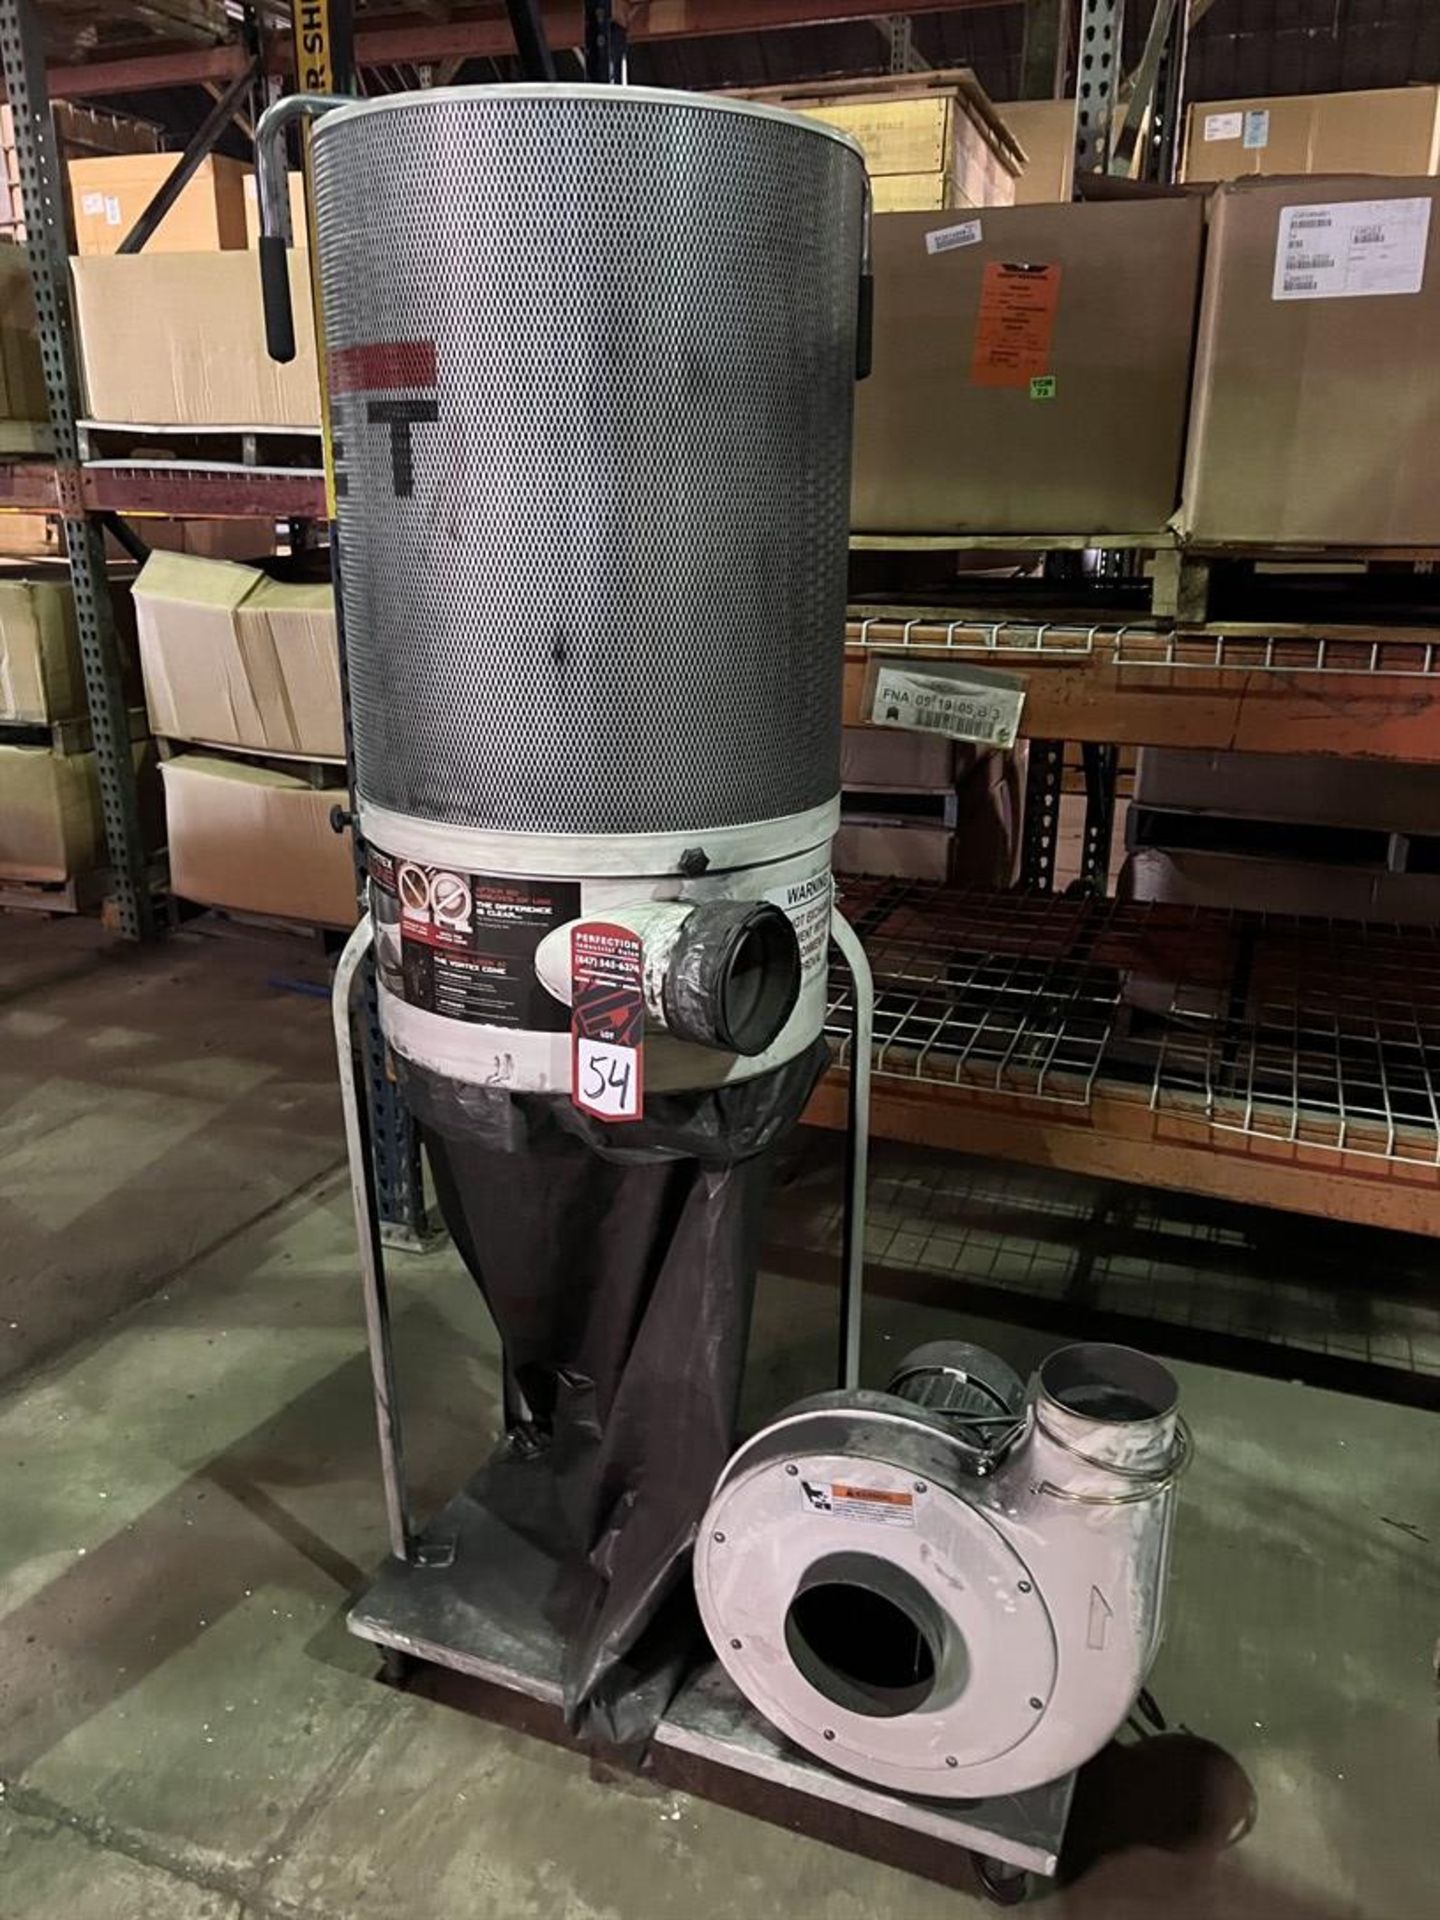 JET DC-1200VX Vortex Cone Dust Collector, s/n 19090625, 2 HP (Building 39) - Image 2 of 6